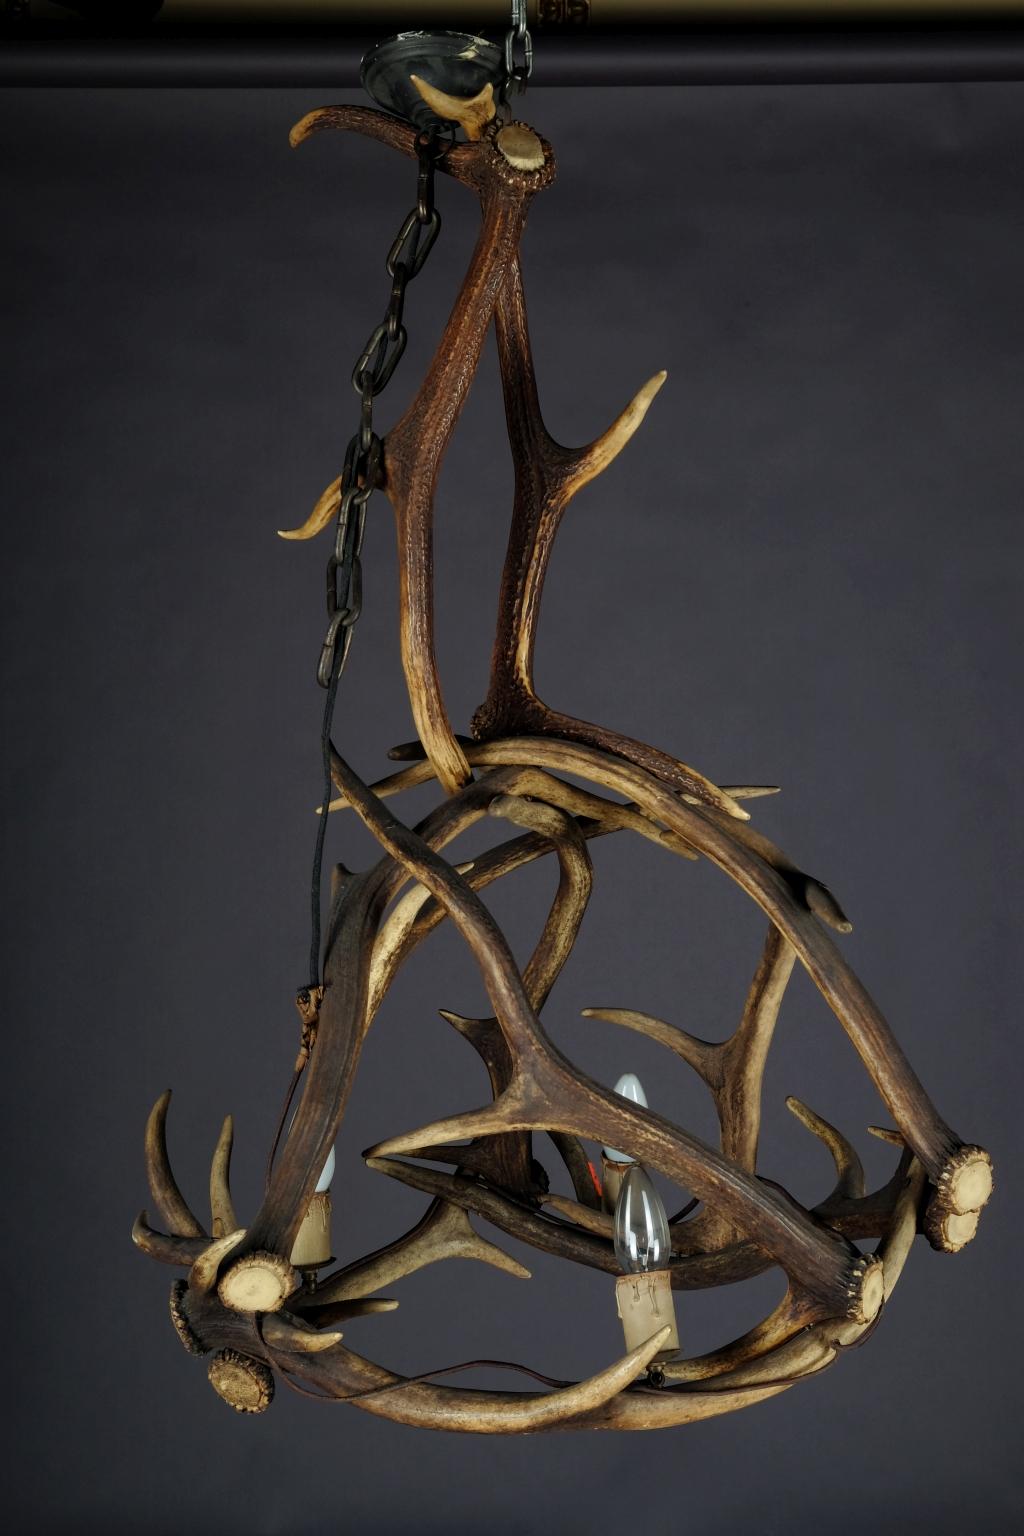 Excellent Hunting Antler Lamp or Challenge Antique in 1900
Super hunty lamp / challenge lamp, circa 1900.
Manufactured. Electrified three-flame.


(F-65).